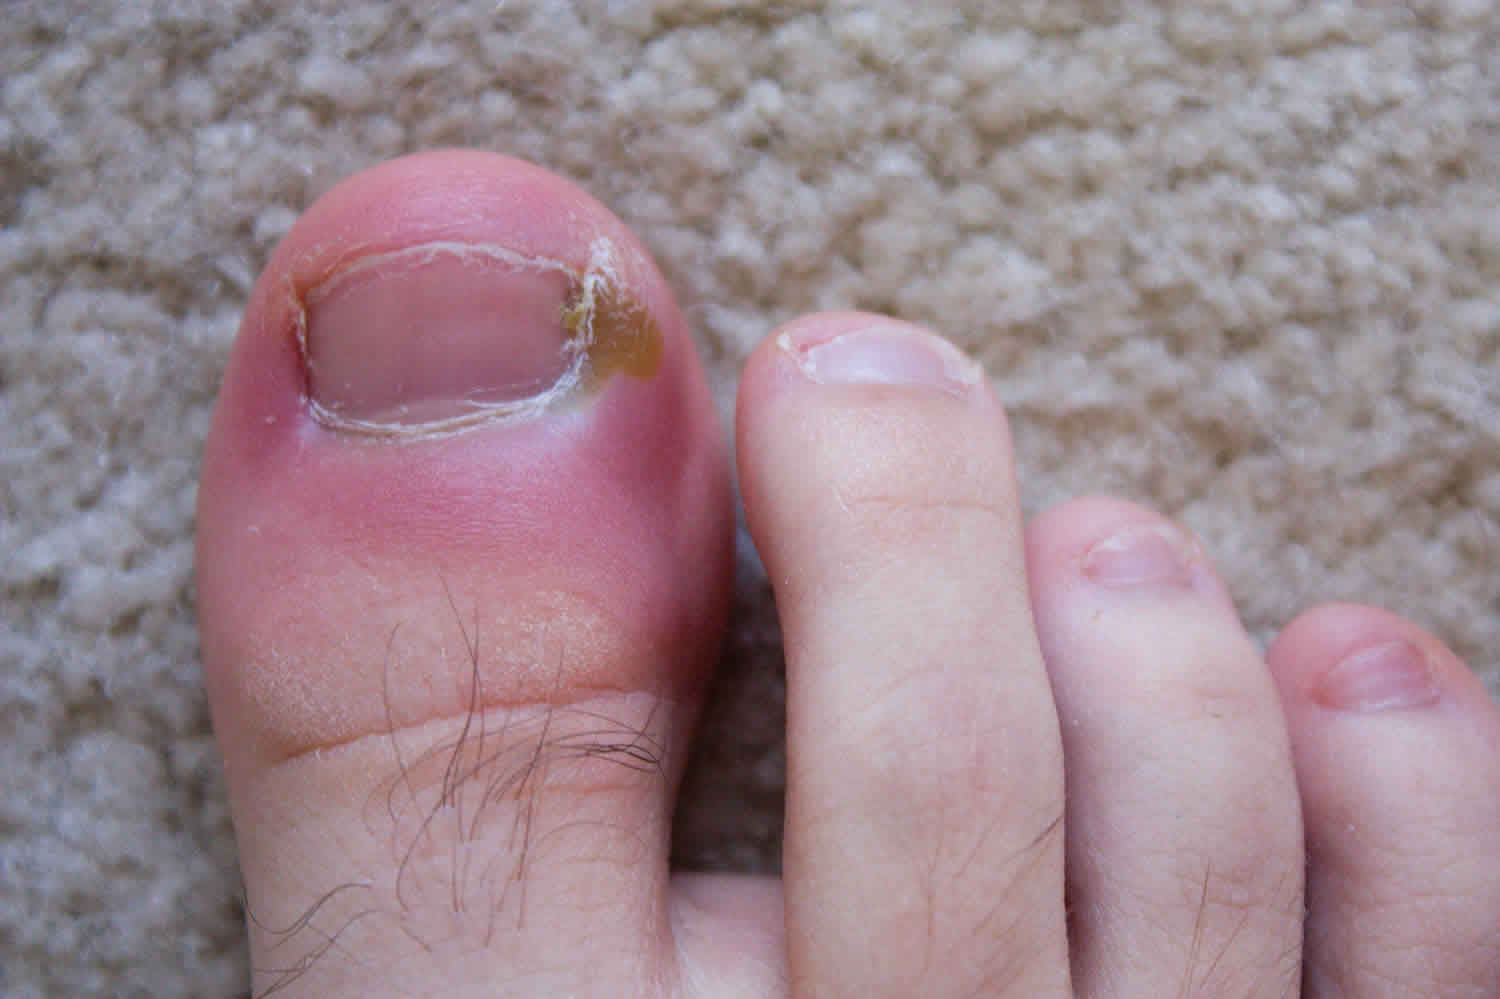 Paronychia Nail Infection - American Osteopathic College of Dermatology  (AOCD)